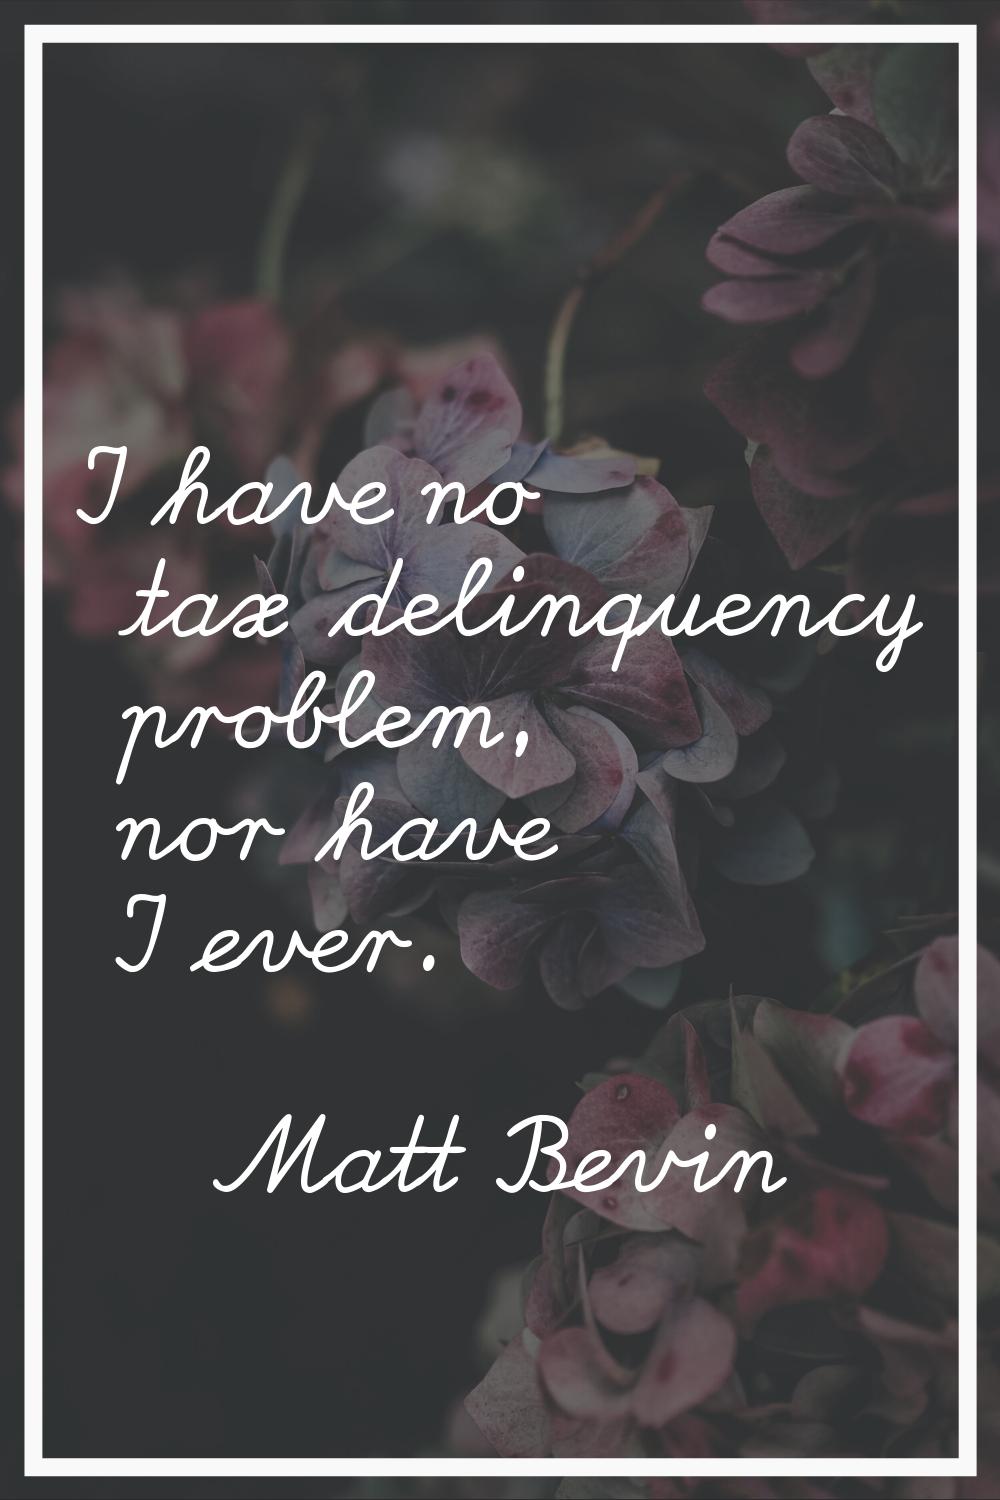 I have no tax delinquency problem, nor have I ever.